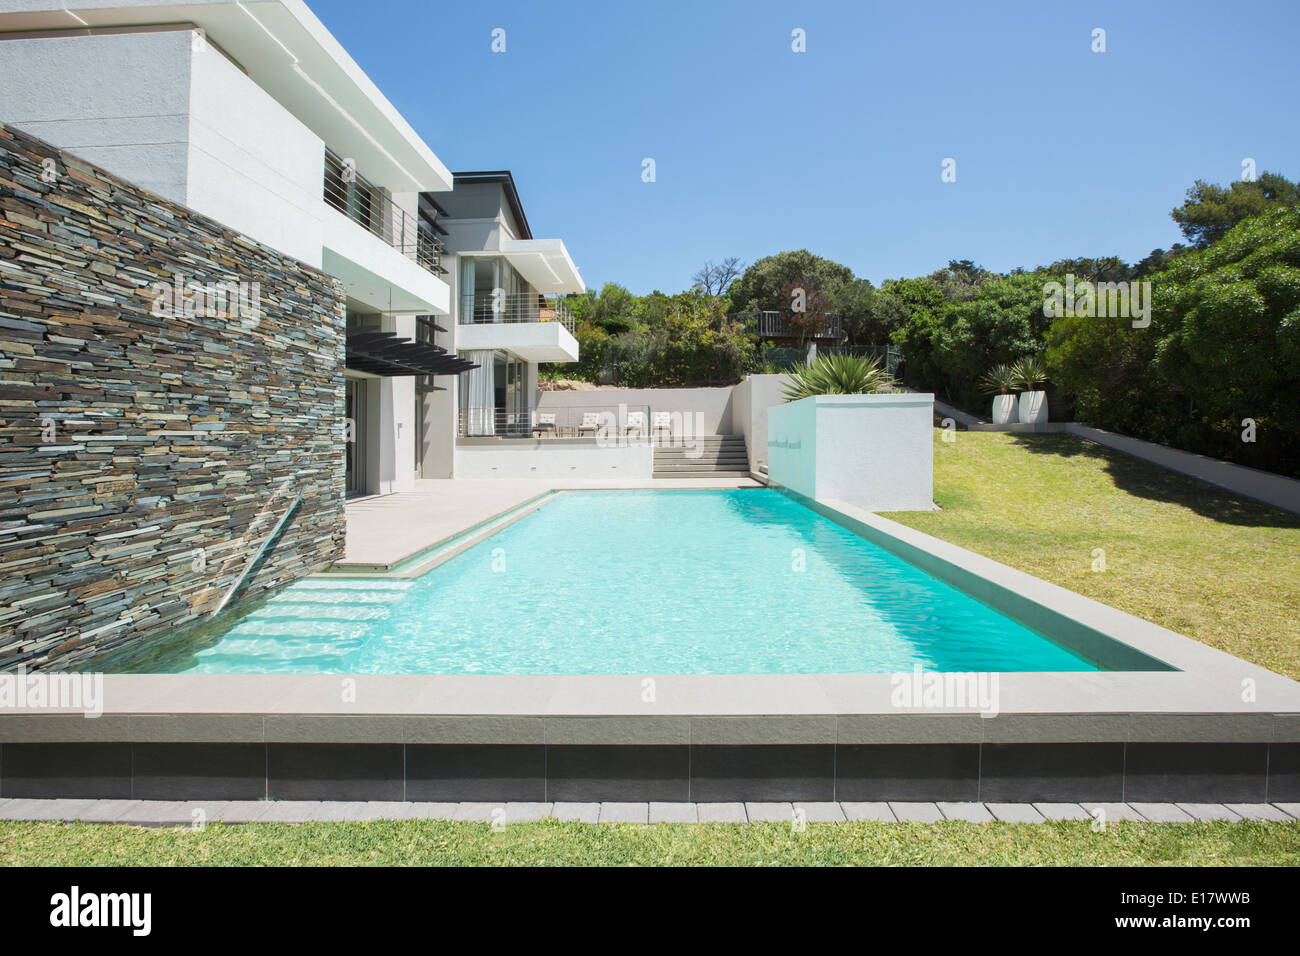 Modern house with swimming pool Stock Photo